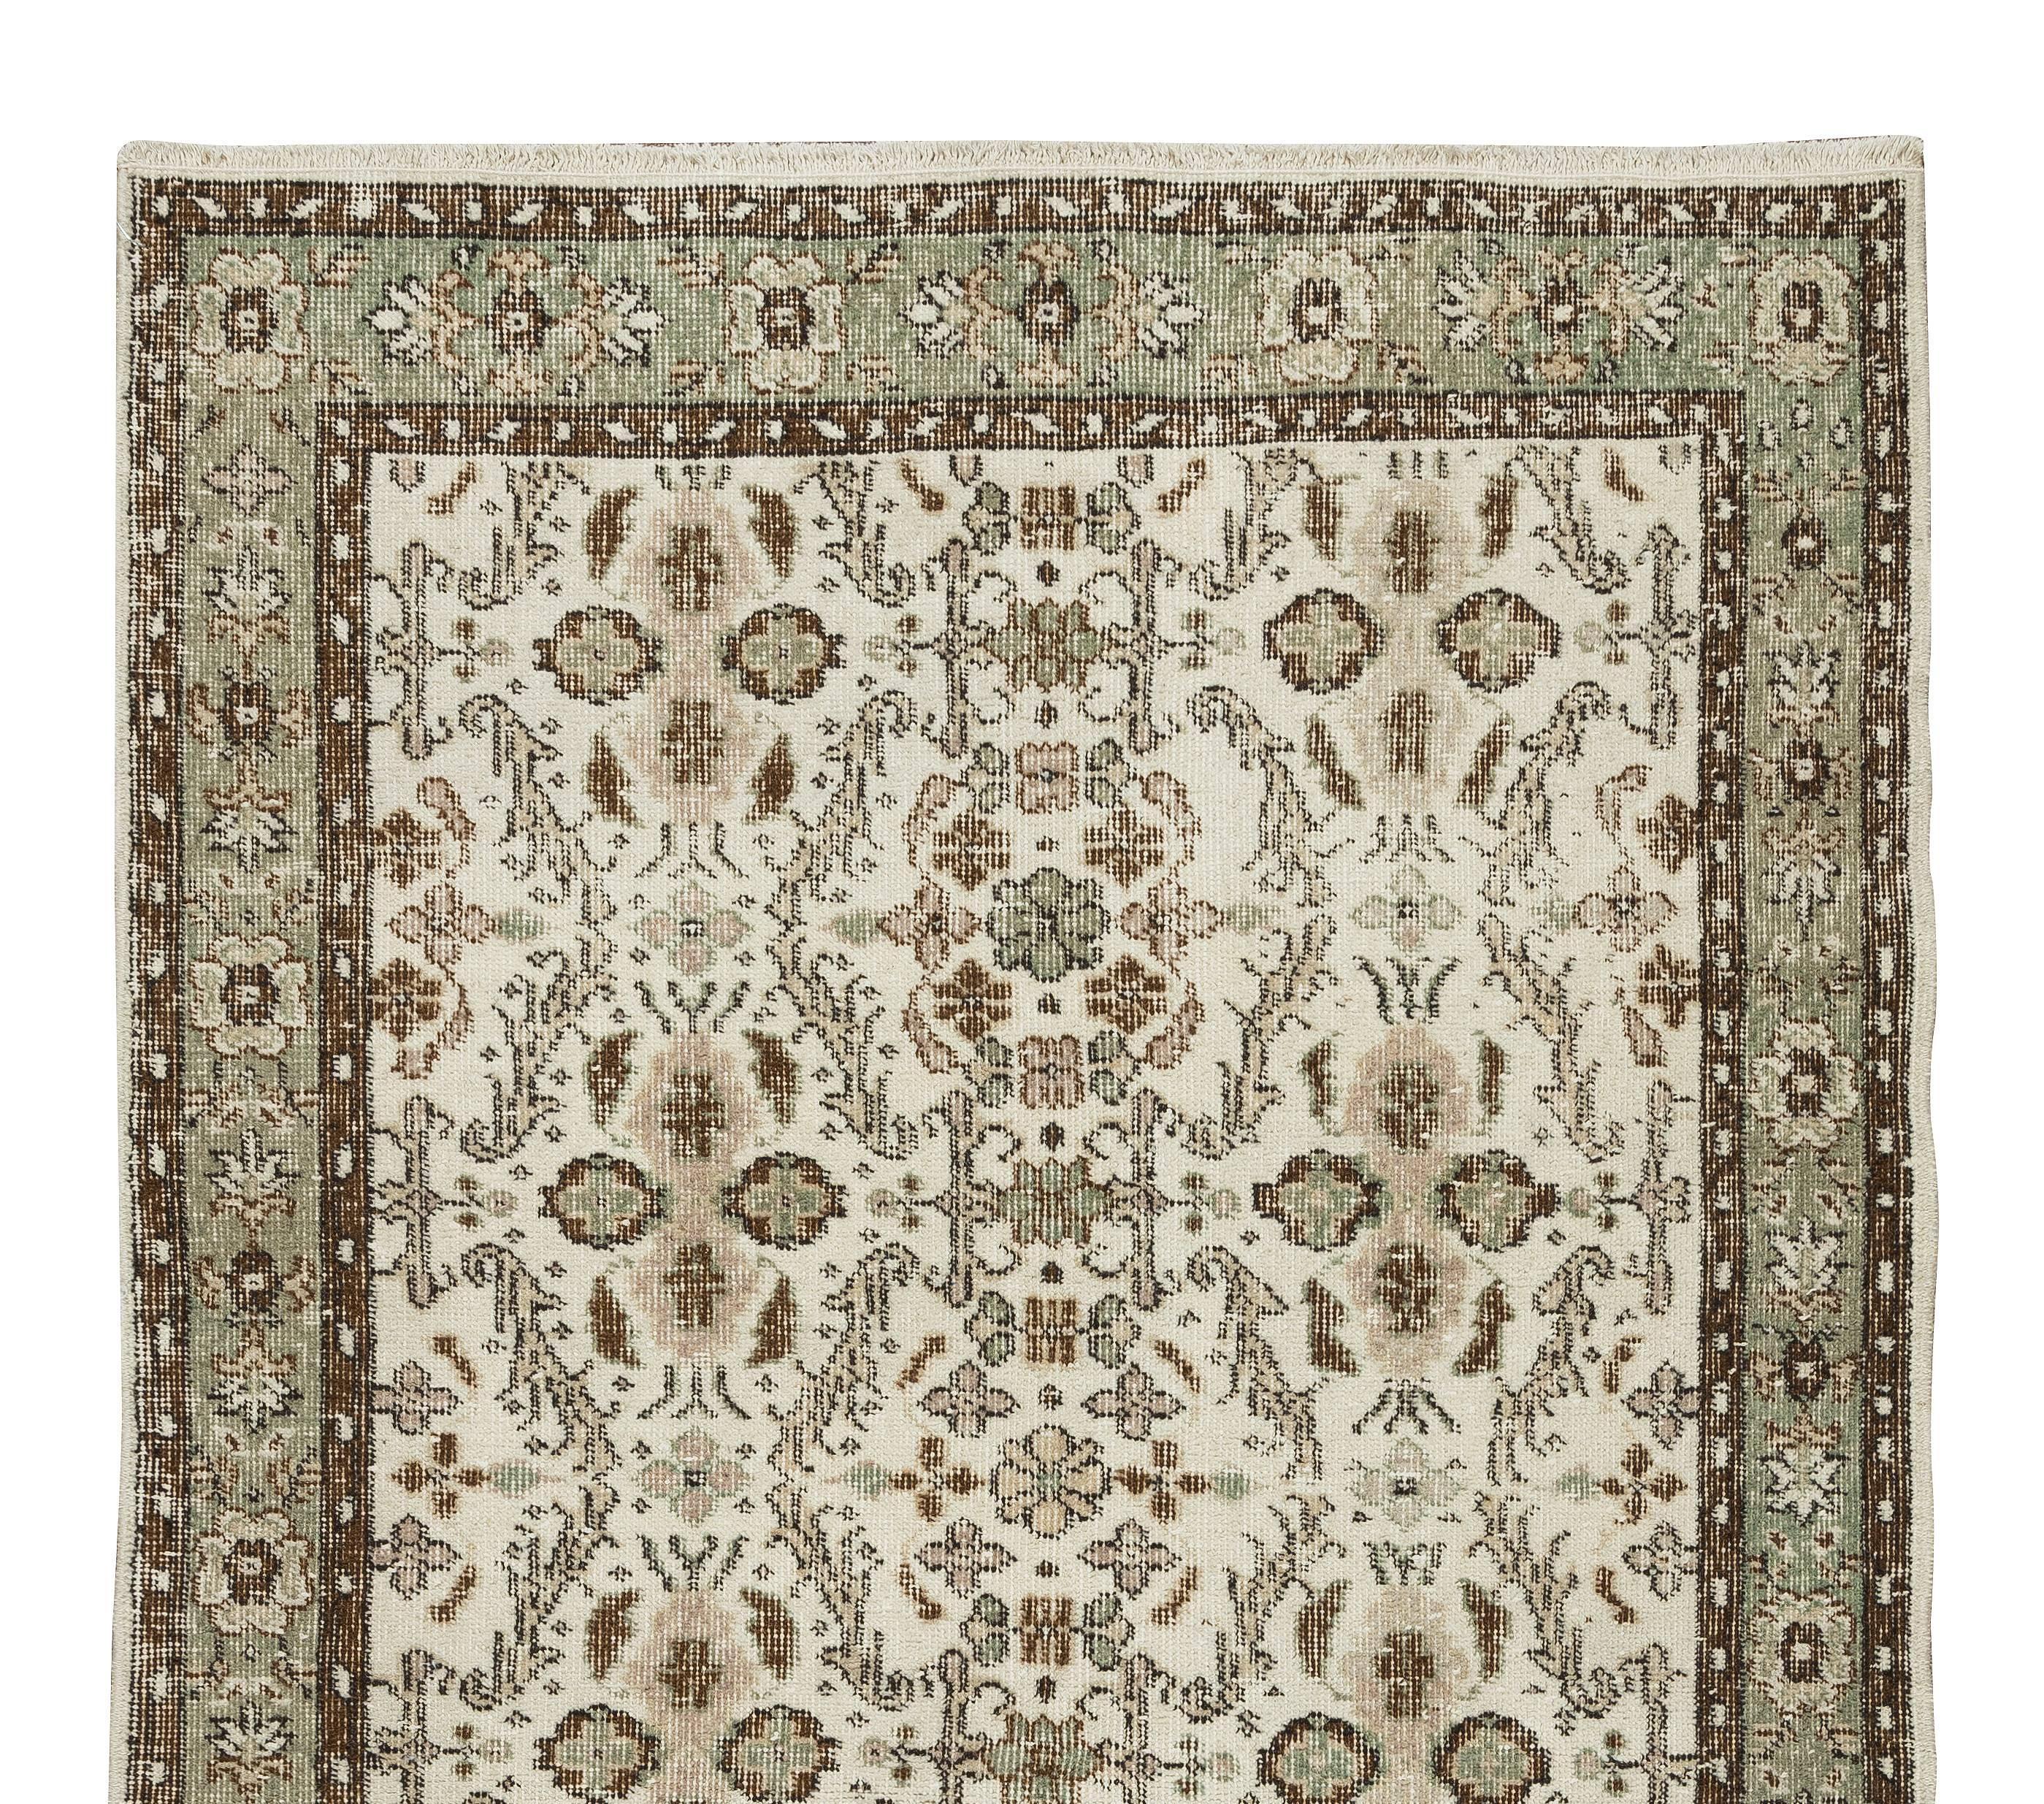 Hand-Knotted Vintage Handmade Turkish Accent Rug, Floral Patterned Floor Covering For Sale